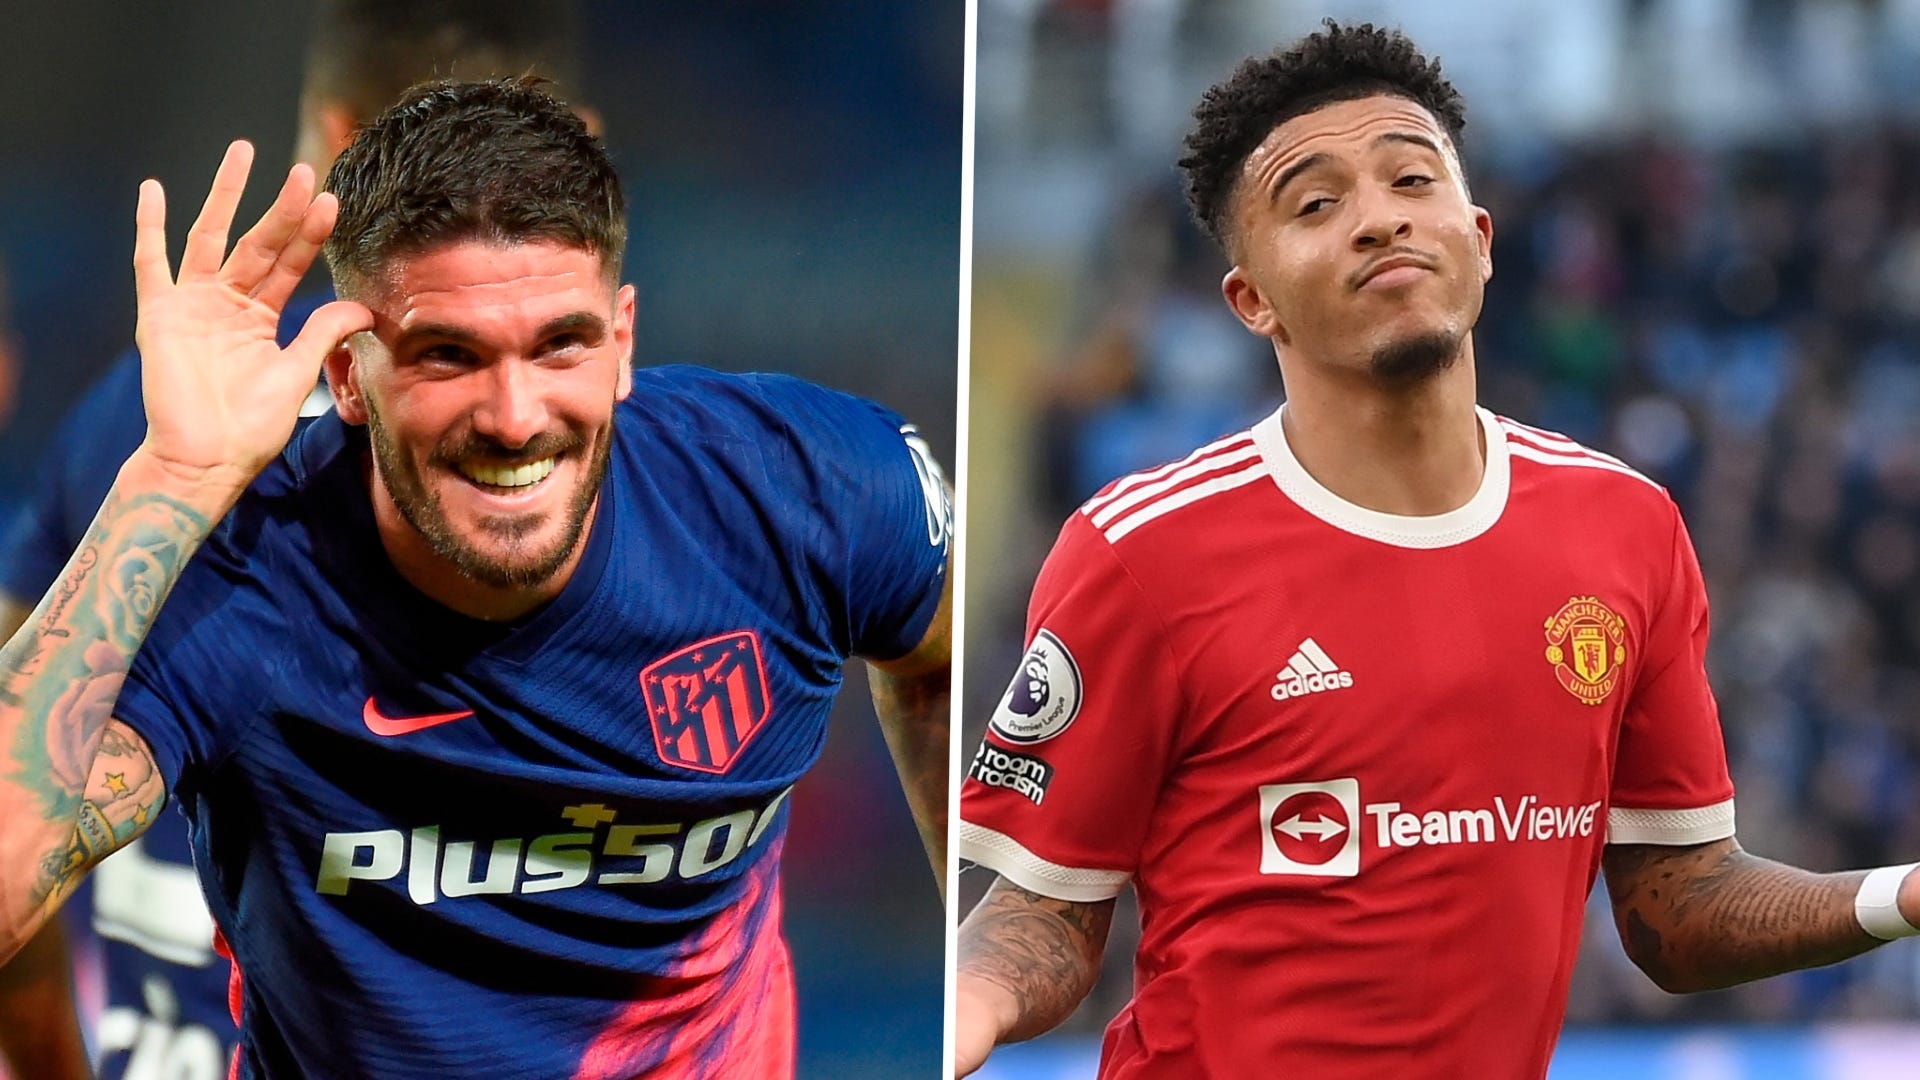 Man Utd vs Atletico Madrid Live stream, TV channel, kick-off time and how to watch Goal Uganda